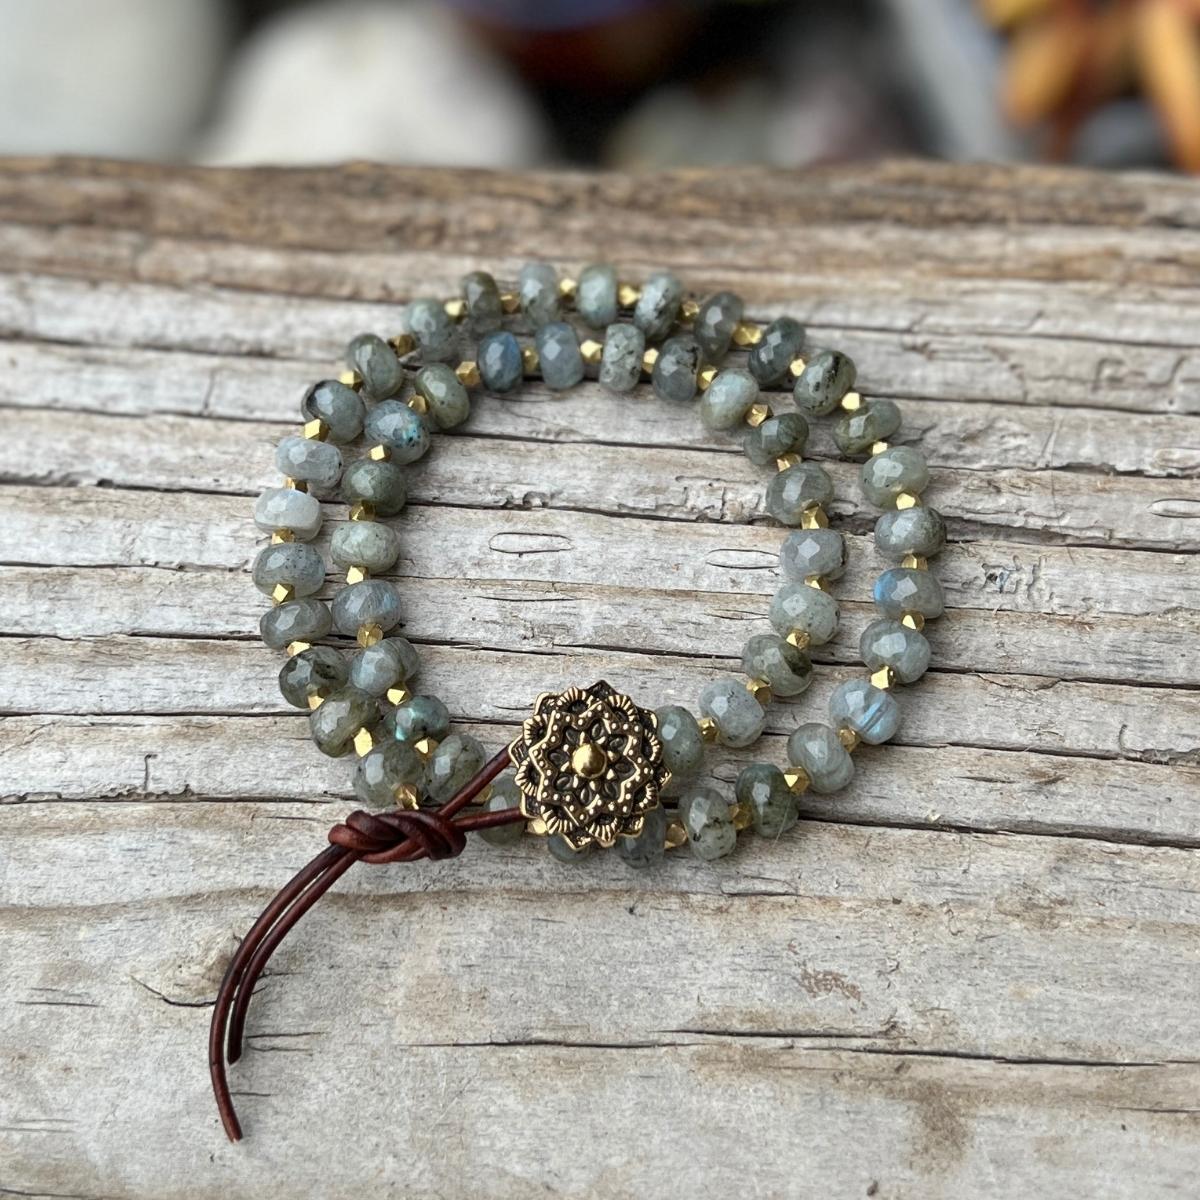 As you wear your Mandala Whispers of Labradorite Bracelet, you're continuously reminded of the harmonious blend of your individual journey with the greater tapestry of the universe.